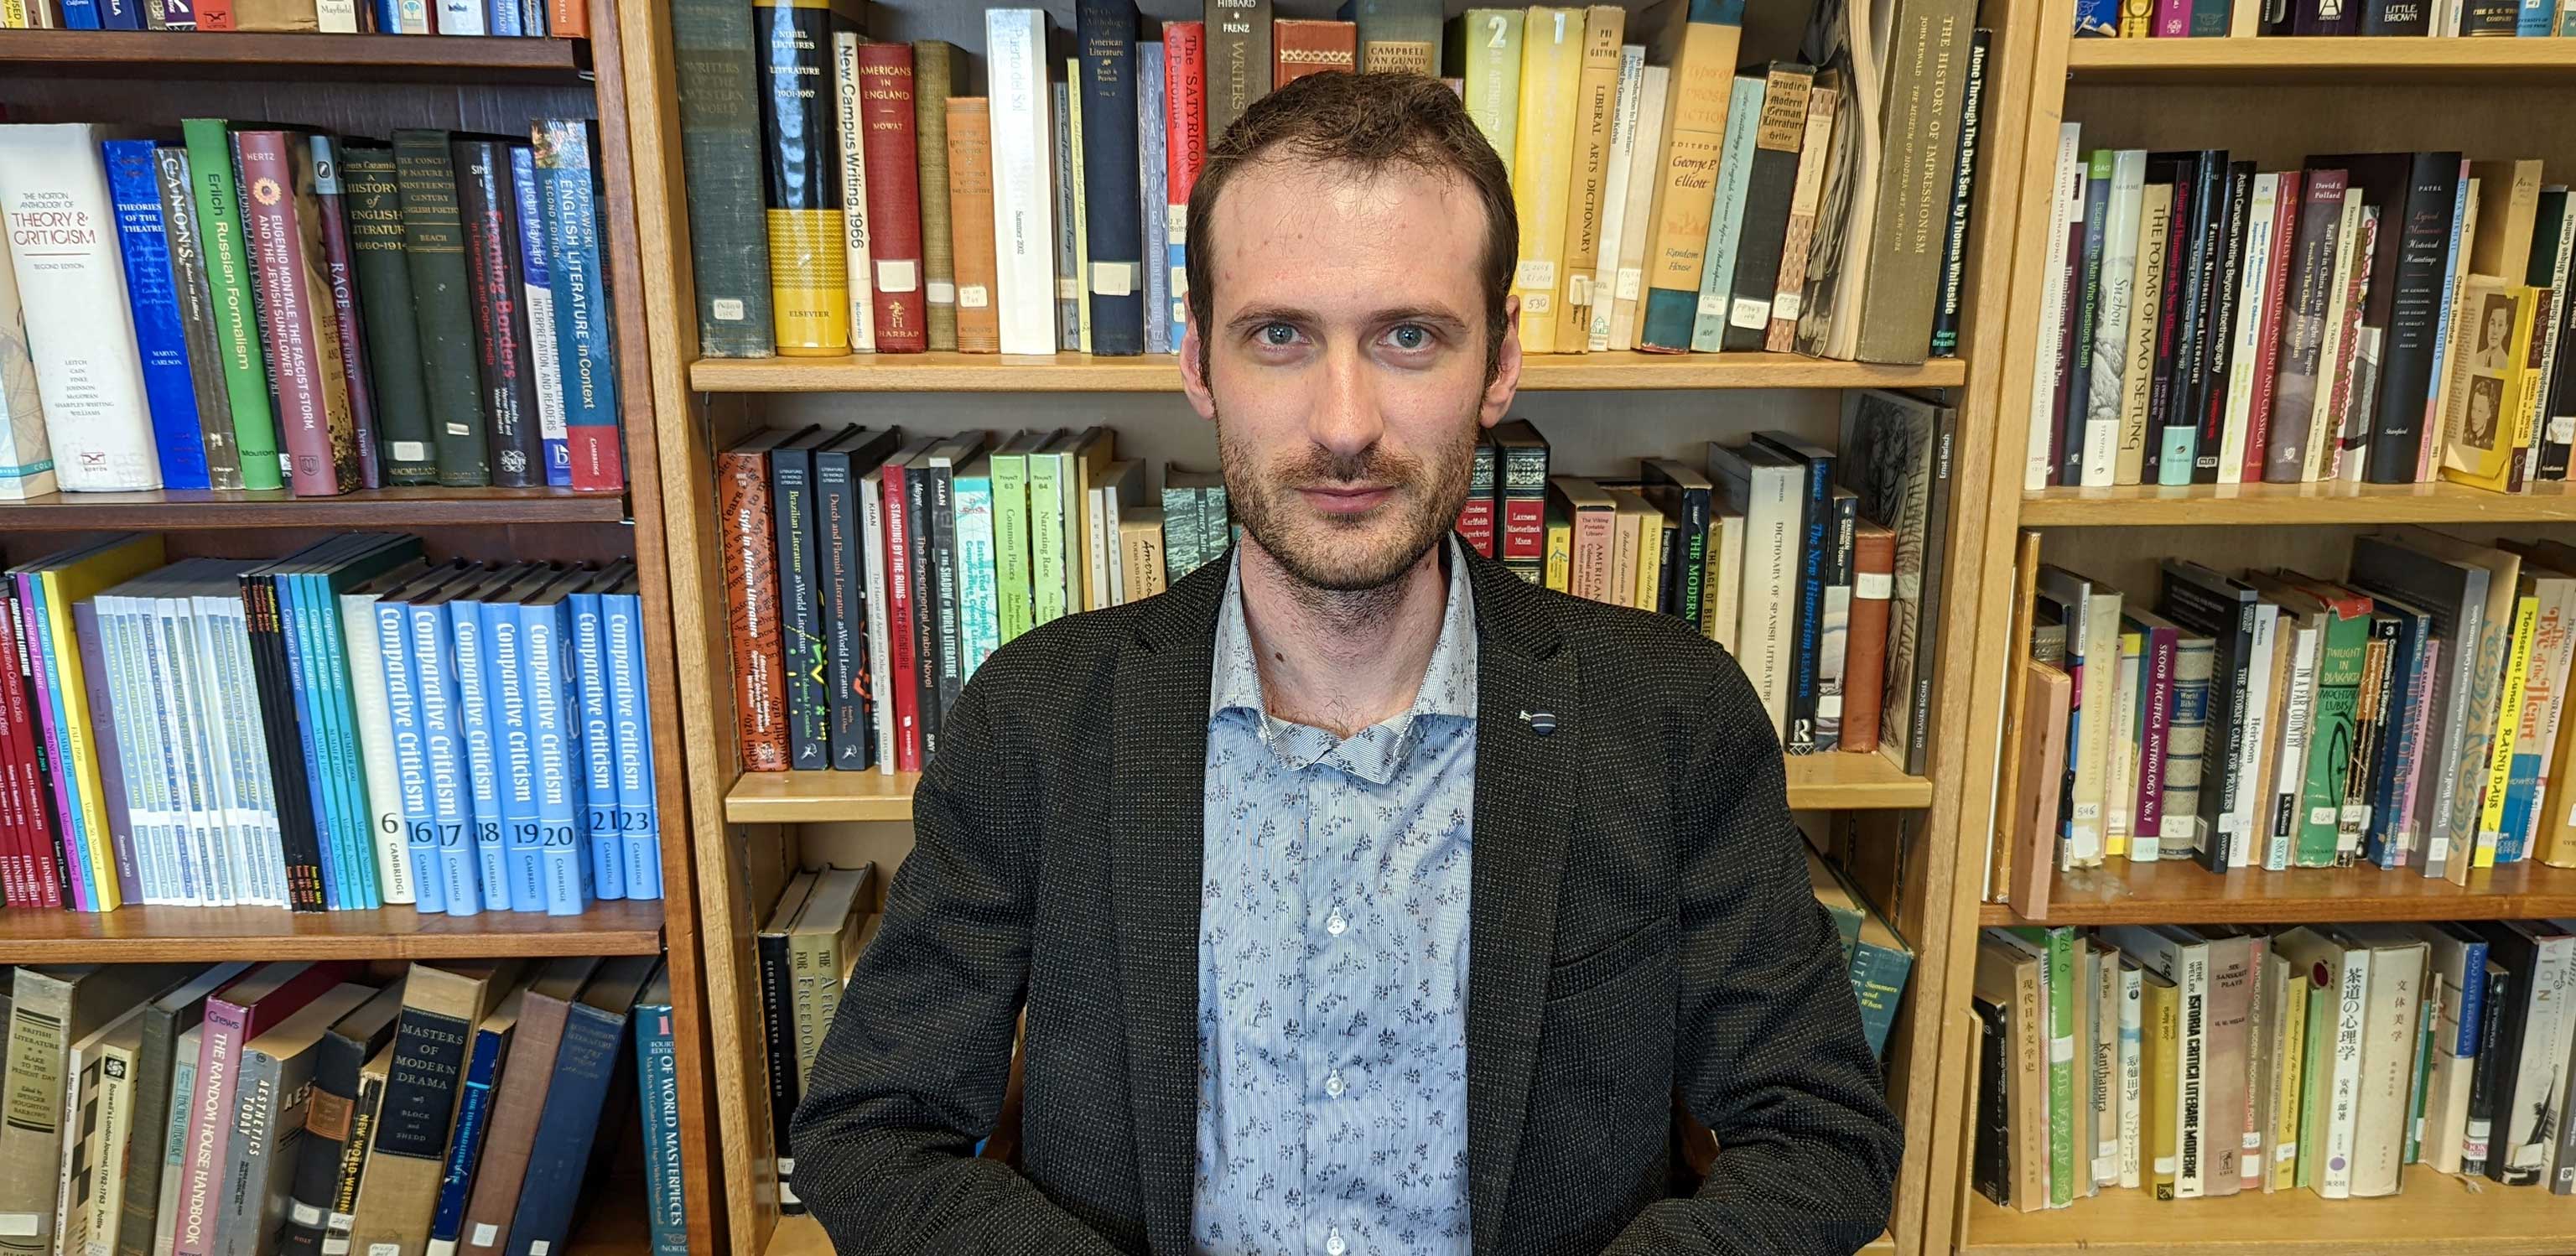 Alex Messejnikov poses in front of a bookshelf crowded with colorful books.